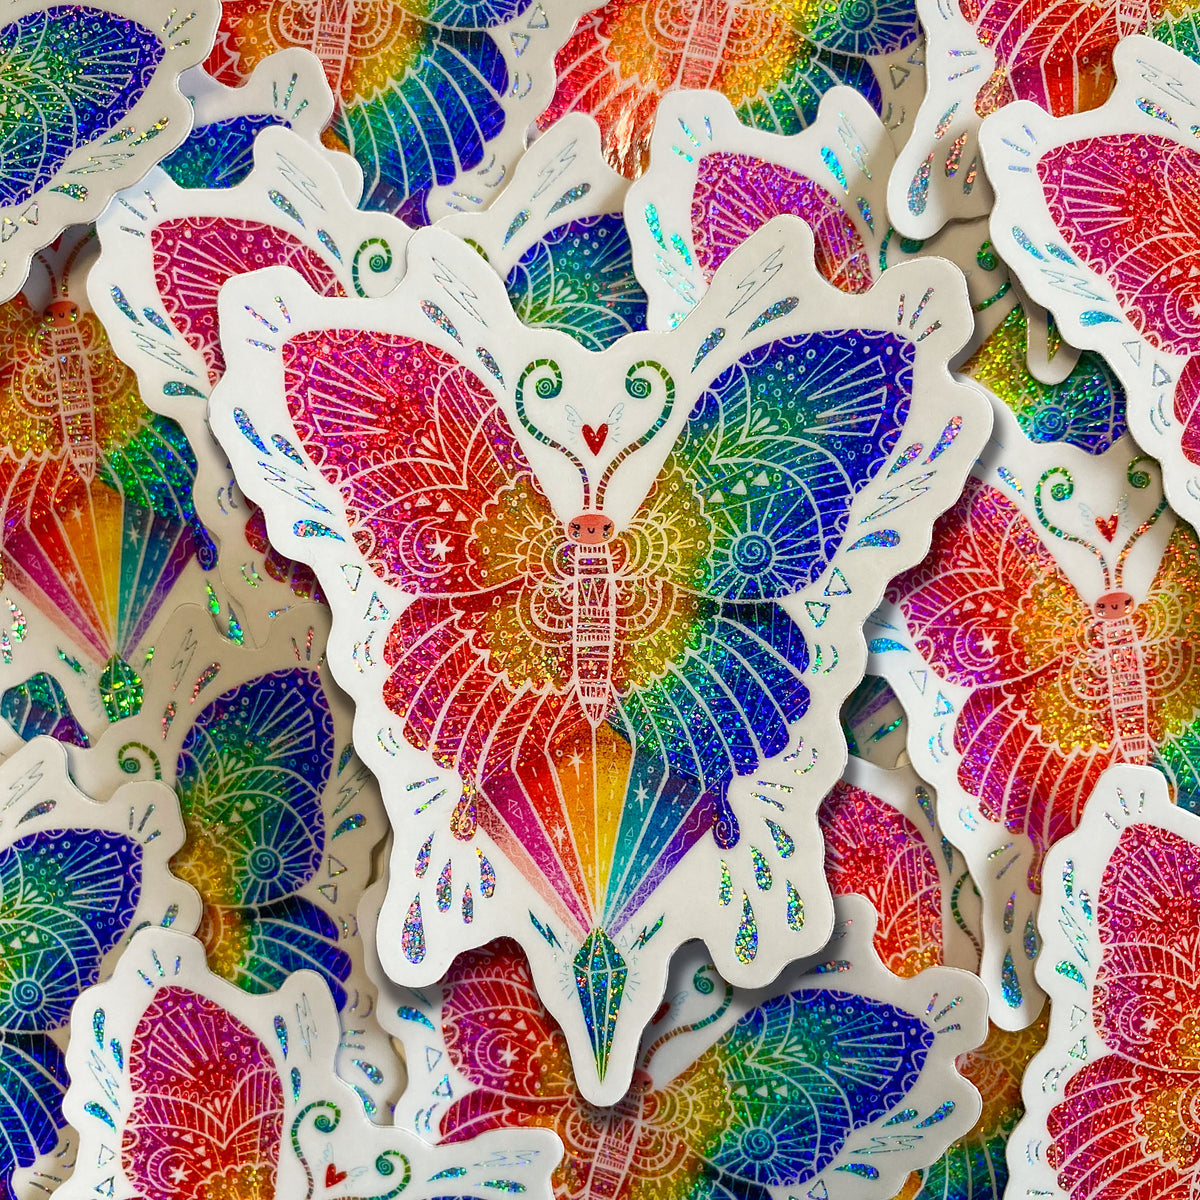 Butterfly shaped rainbow glitter sticker with white outline on a backgound of glitter rainbow stickers